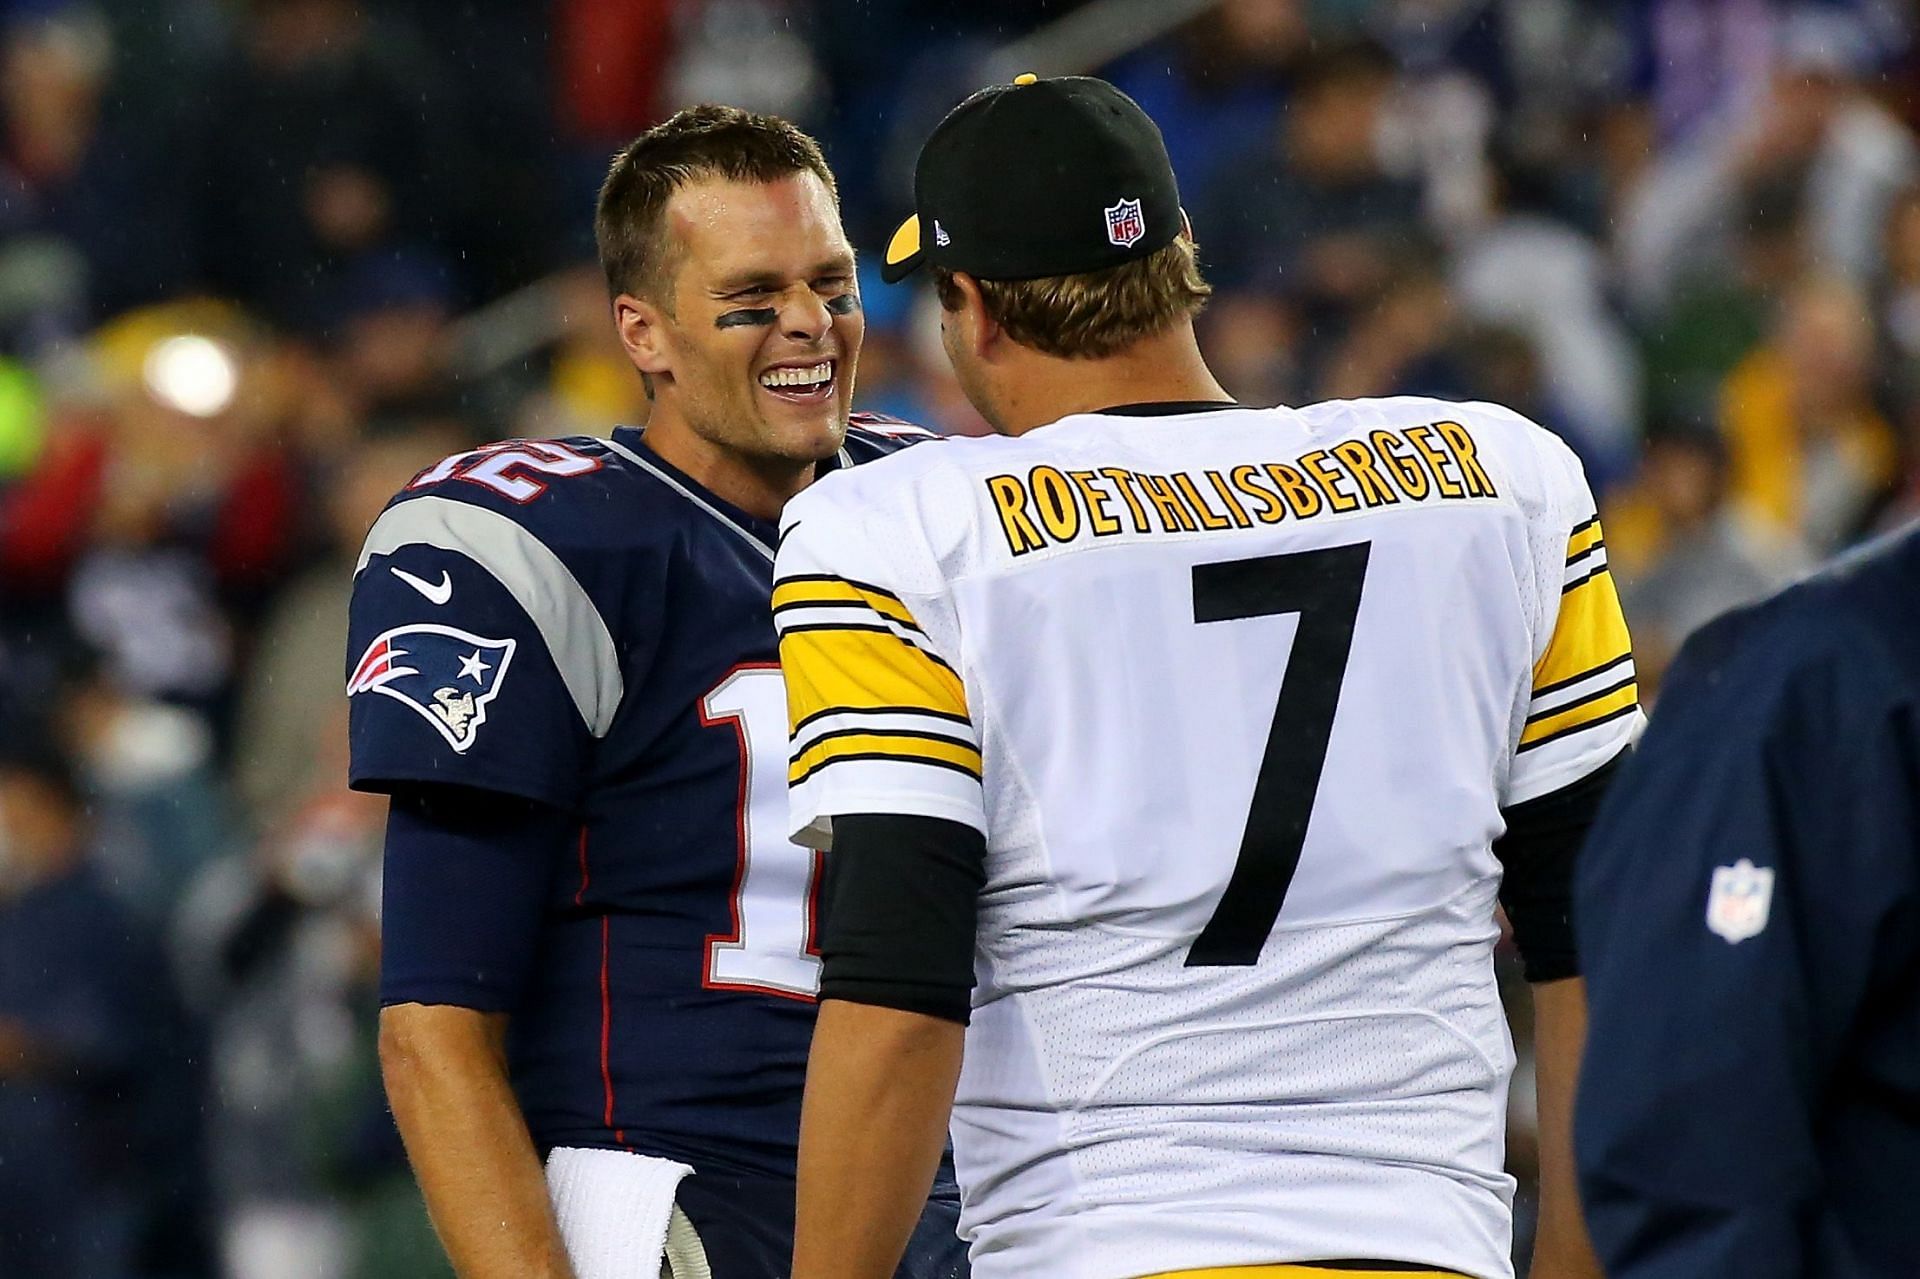 Tom Brady #12 of the New England Patriots and Ben Roethlisberger #7 of the Pittsburgh Steelers speak before the game at Gillette Stadium on September 10, 2015 in Foxboro, Massachusetts.